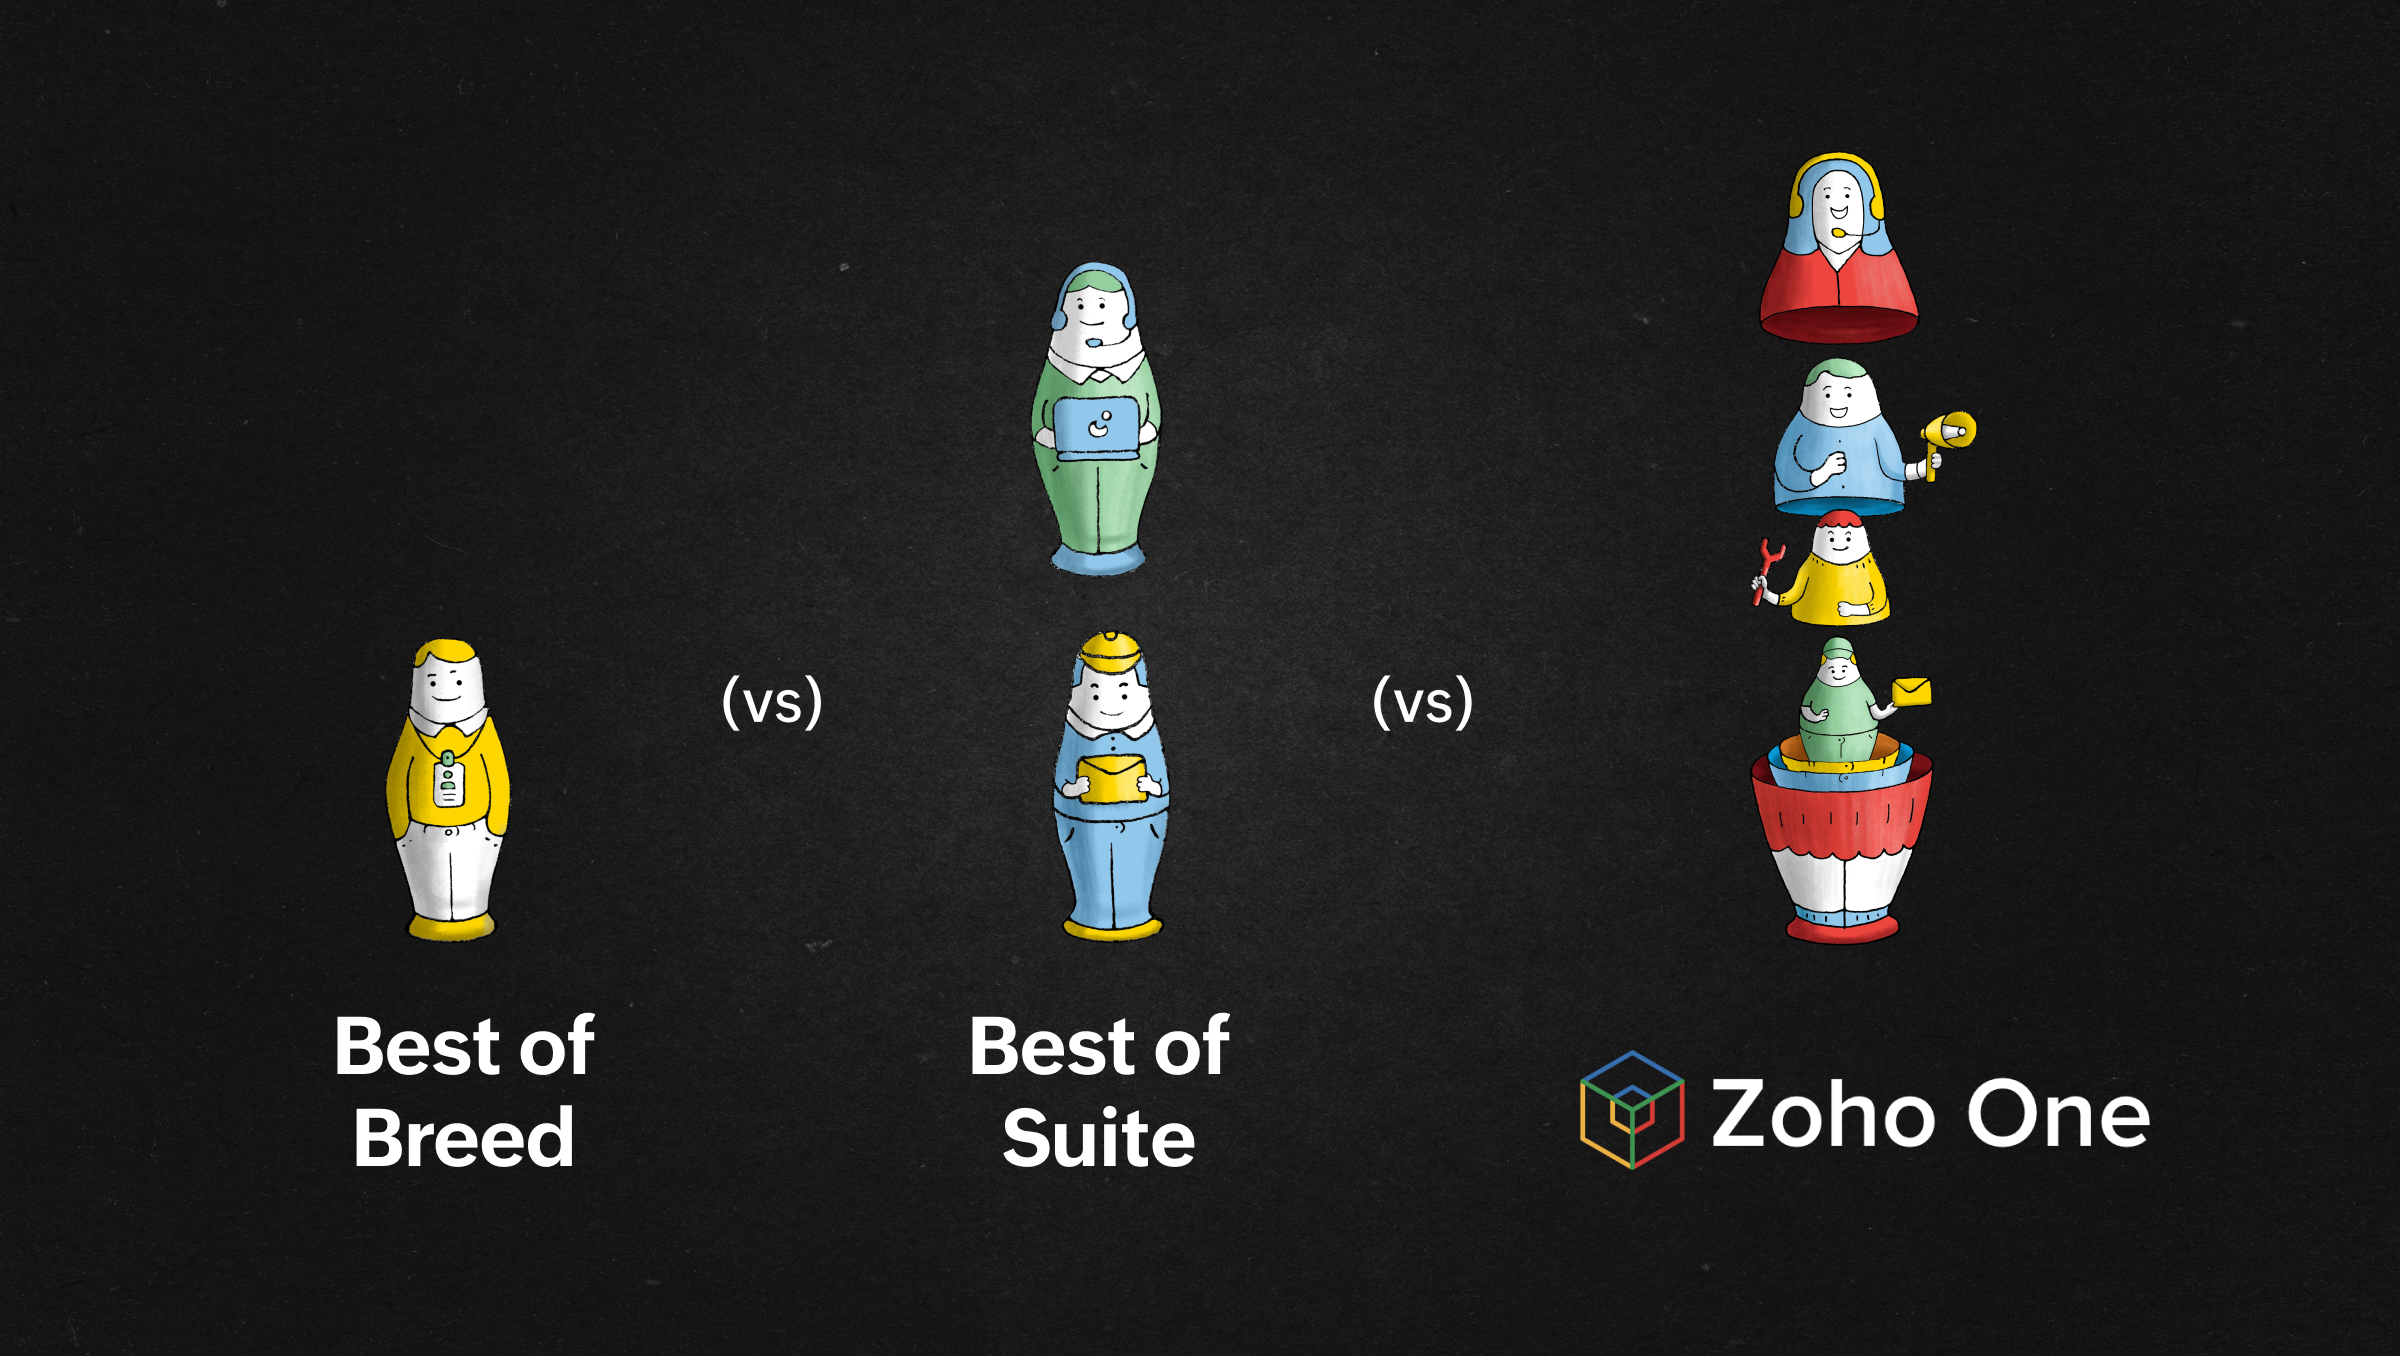 comparision of best-of-breed software, best-of-suite and Zoho One depicting the Matryoshka dolls 